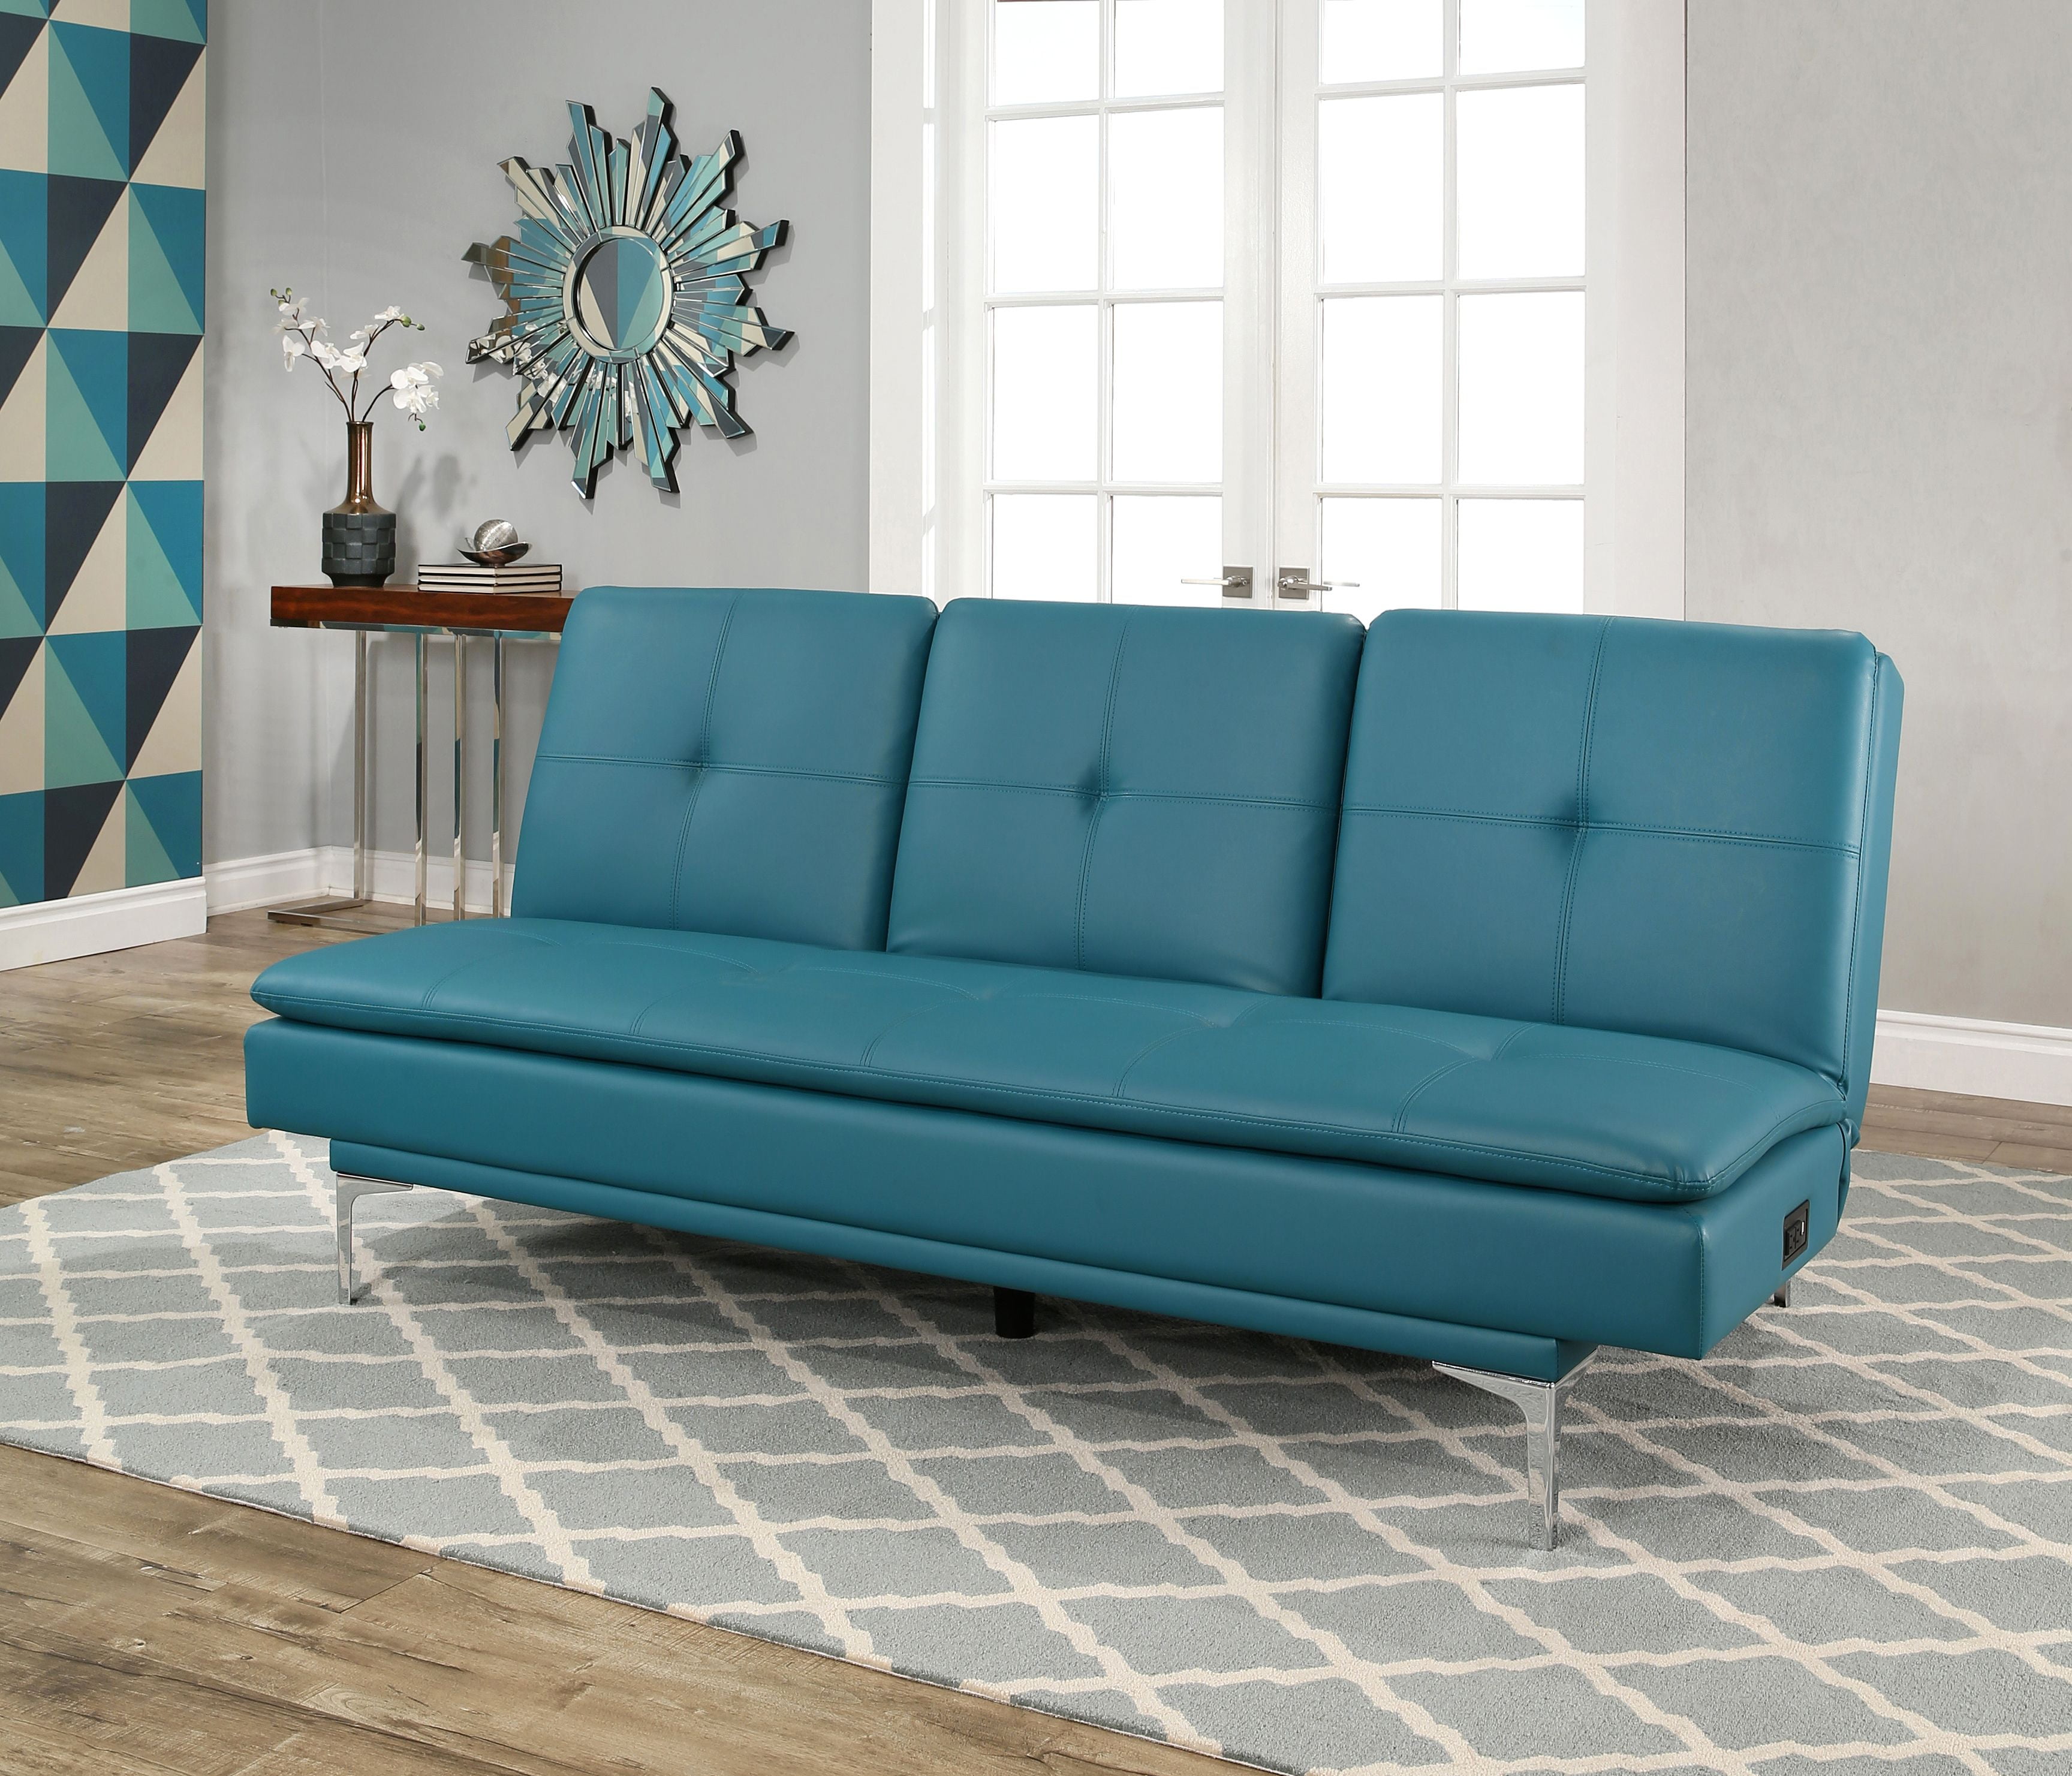 Devon Claire Kirby Bonded Leather, Turquoise Leather Couch